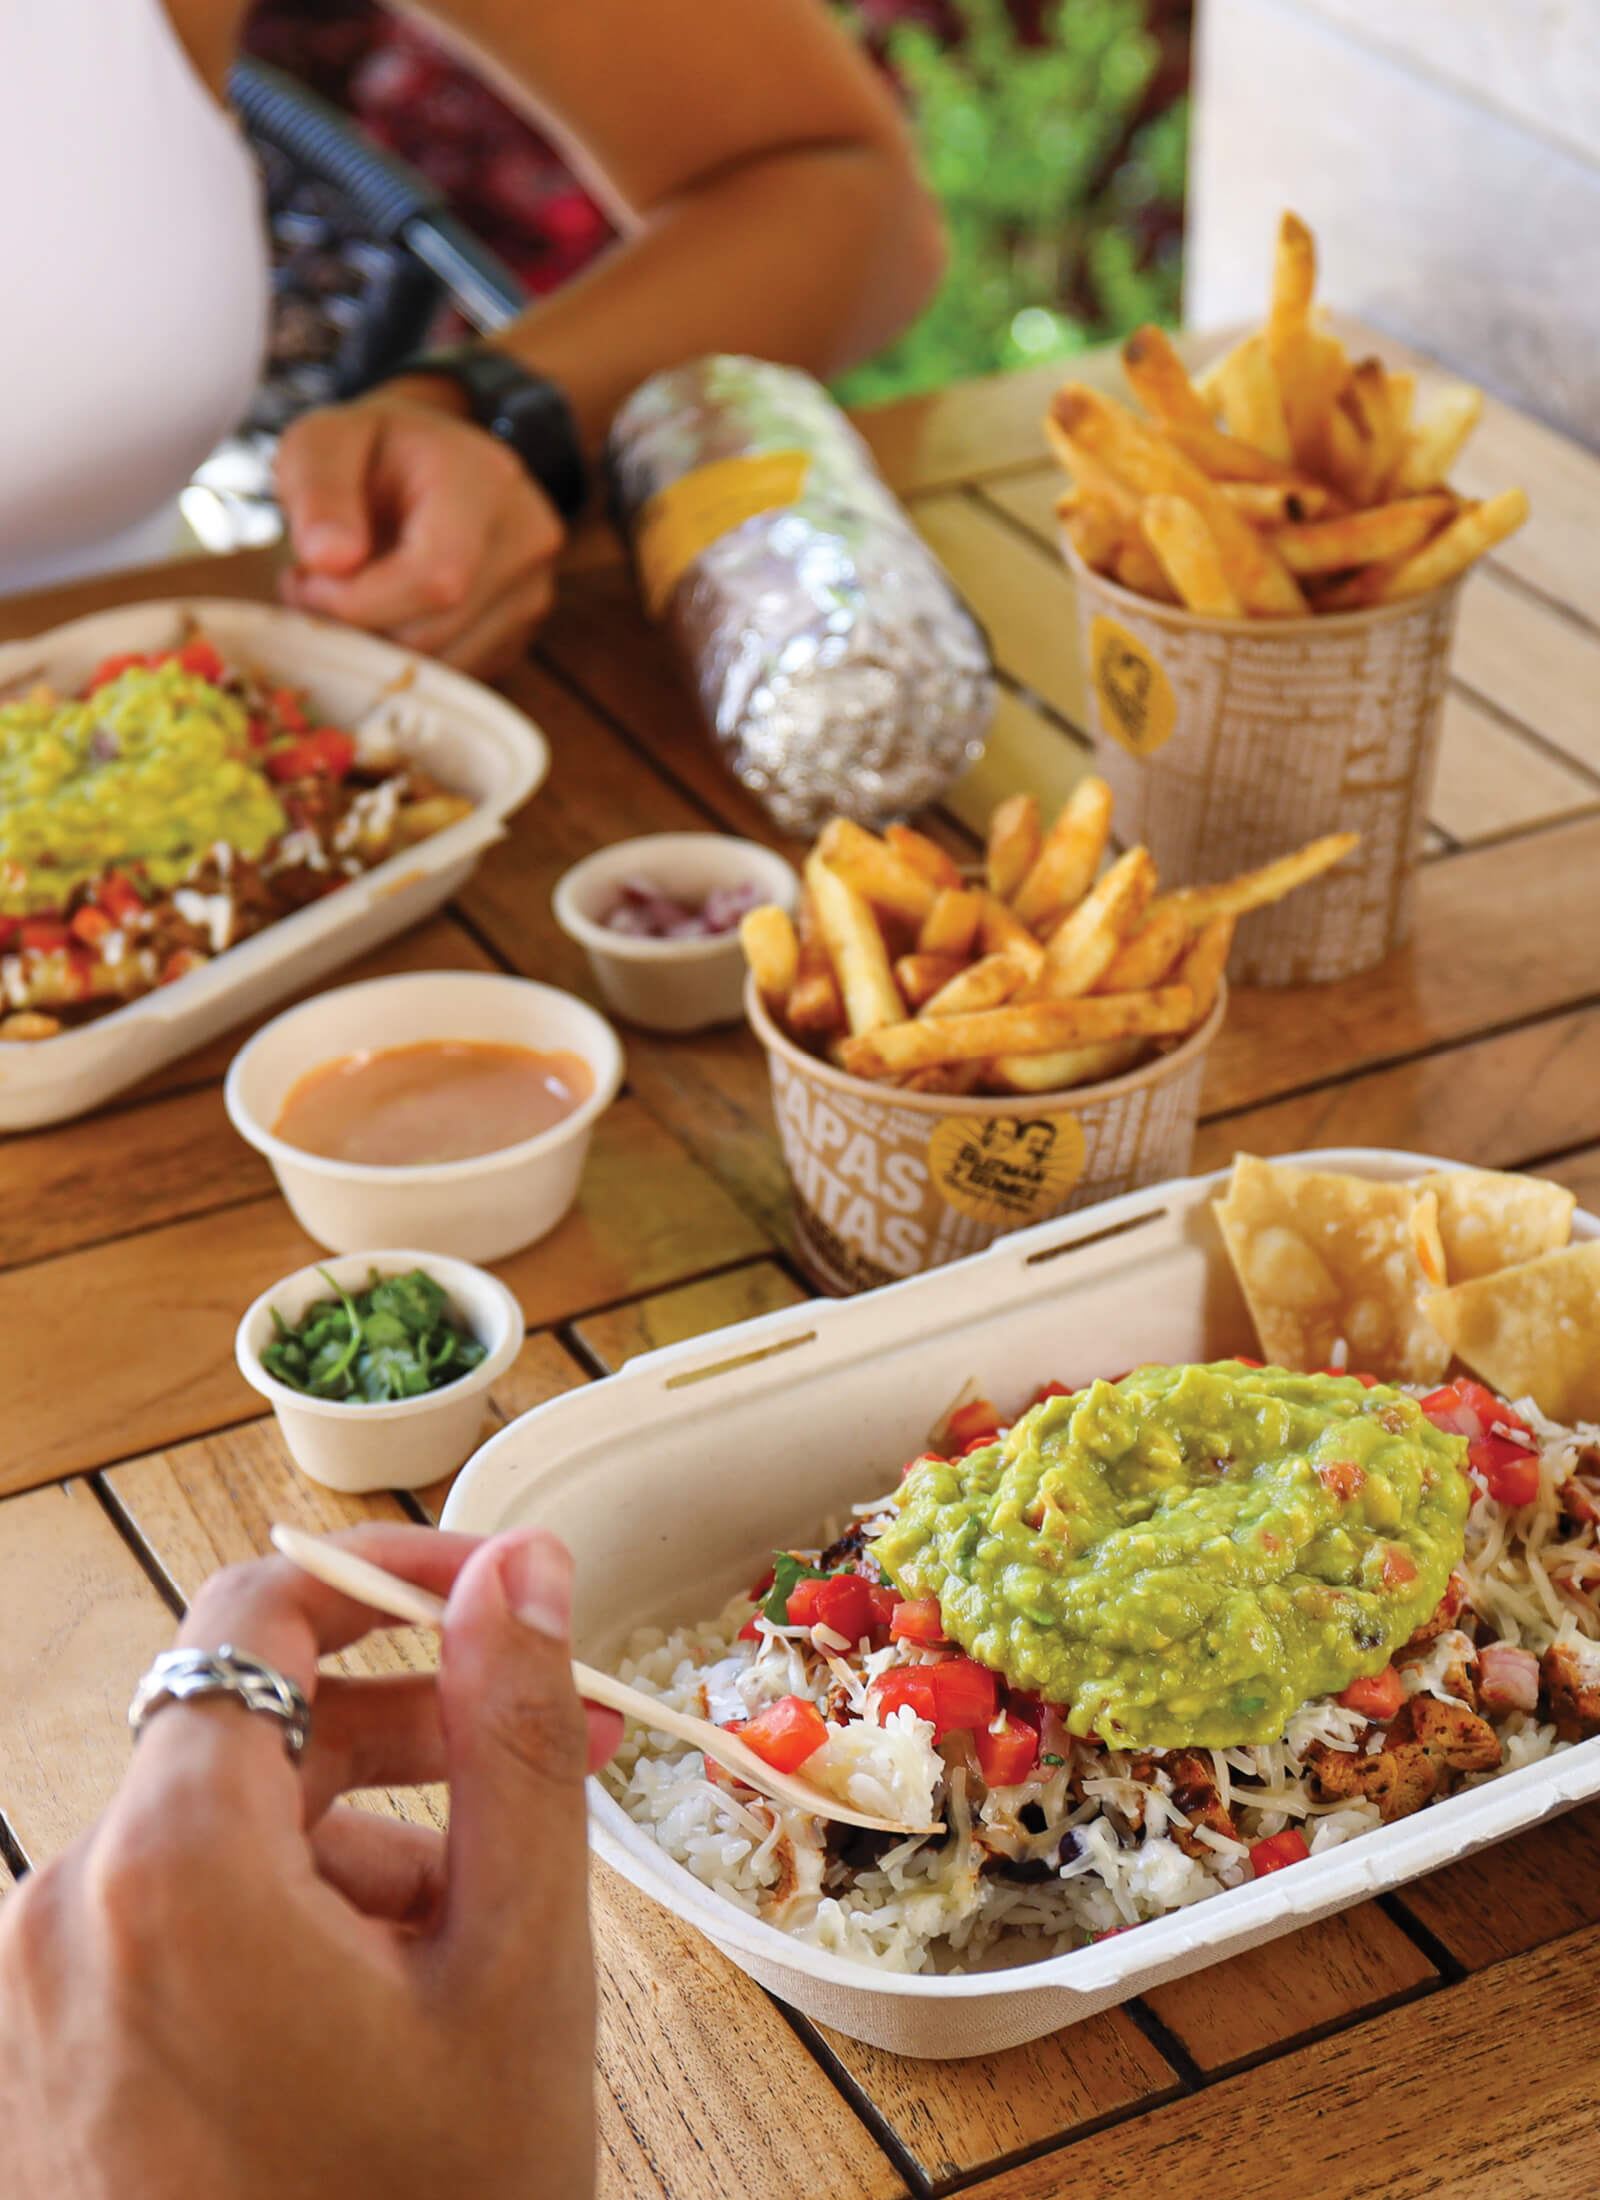 Guzman y Gomez - delicious Mexican food using only the best quality produce